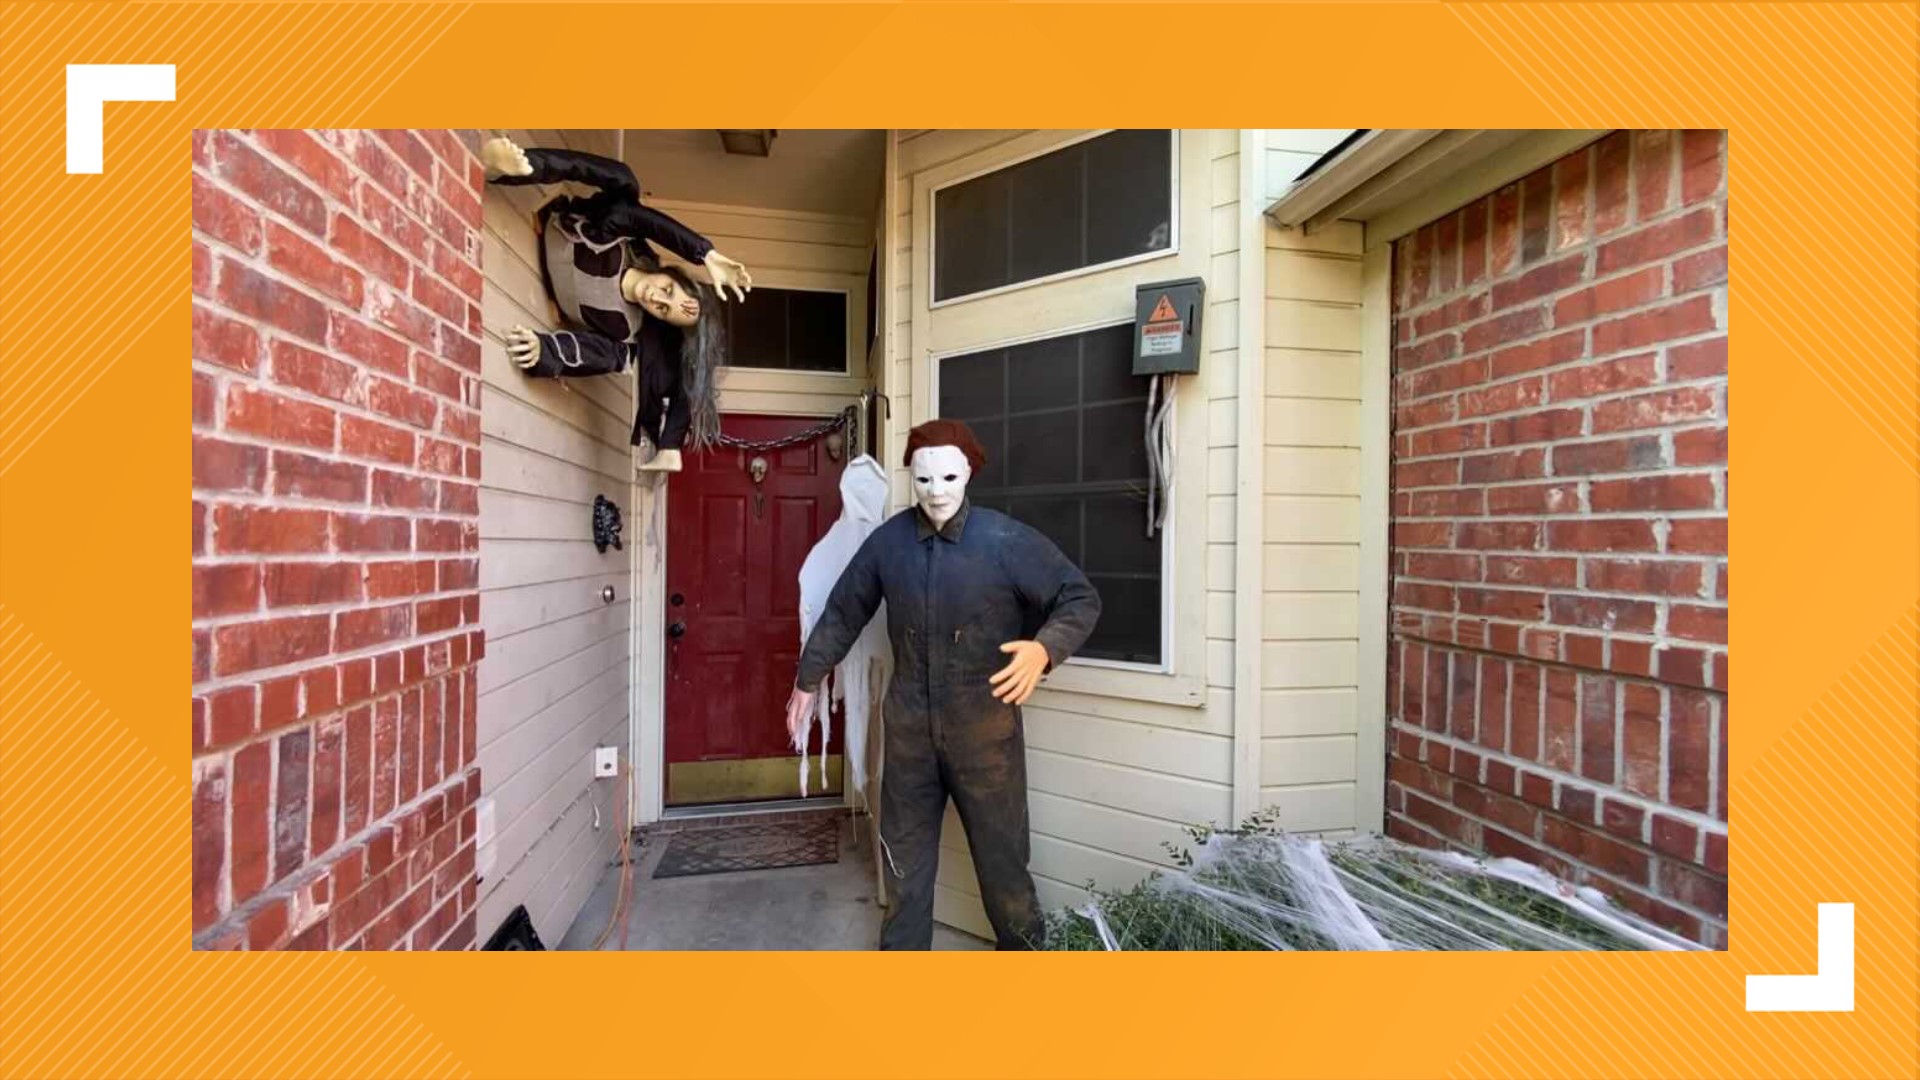 Homeowner Andre Morales is looking to spark joy with scary decorations all over his front yard this Halloween.